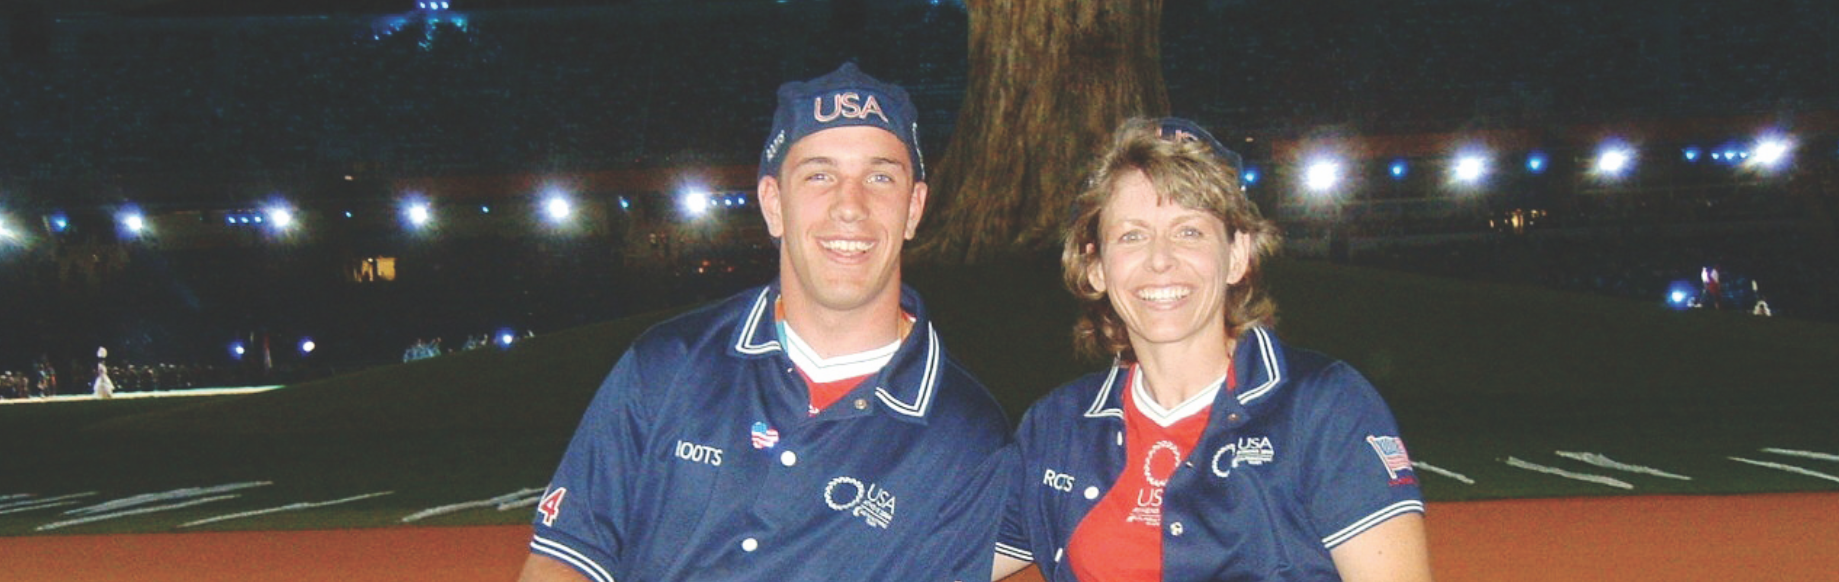 Opening Ceremony at the 2000 Sydney Paralympic Games, Keith Newerla (left) and Lynn Seidemann.